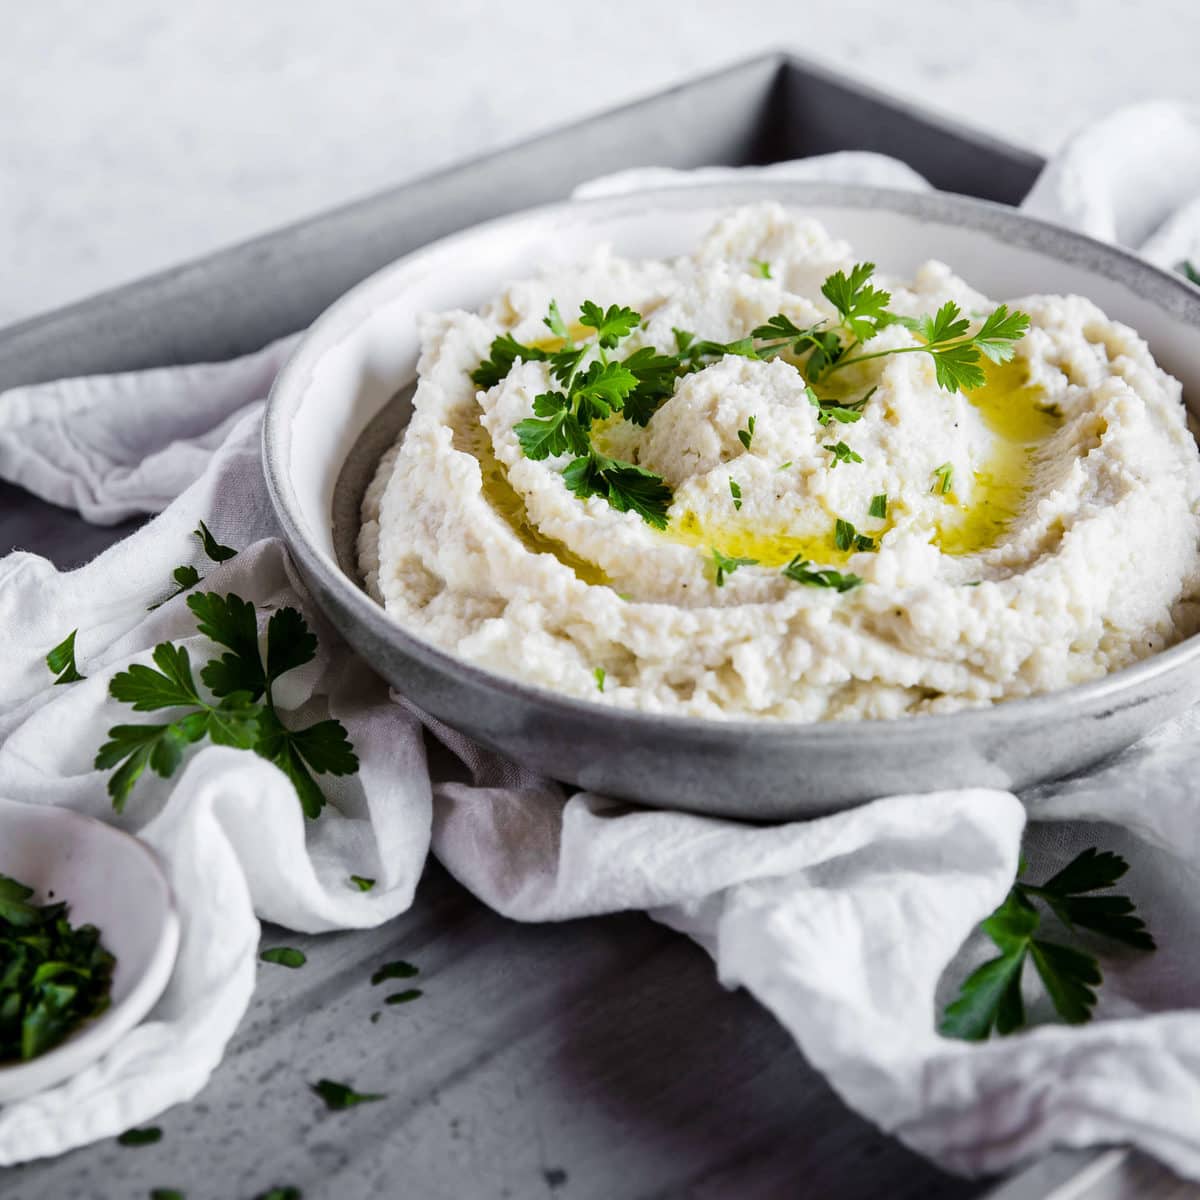 a gray ceramic bowl full of mashed cauliflower with a swirl of melted butter and parsley on top